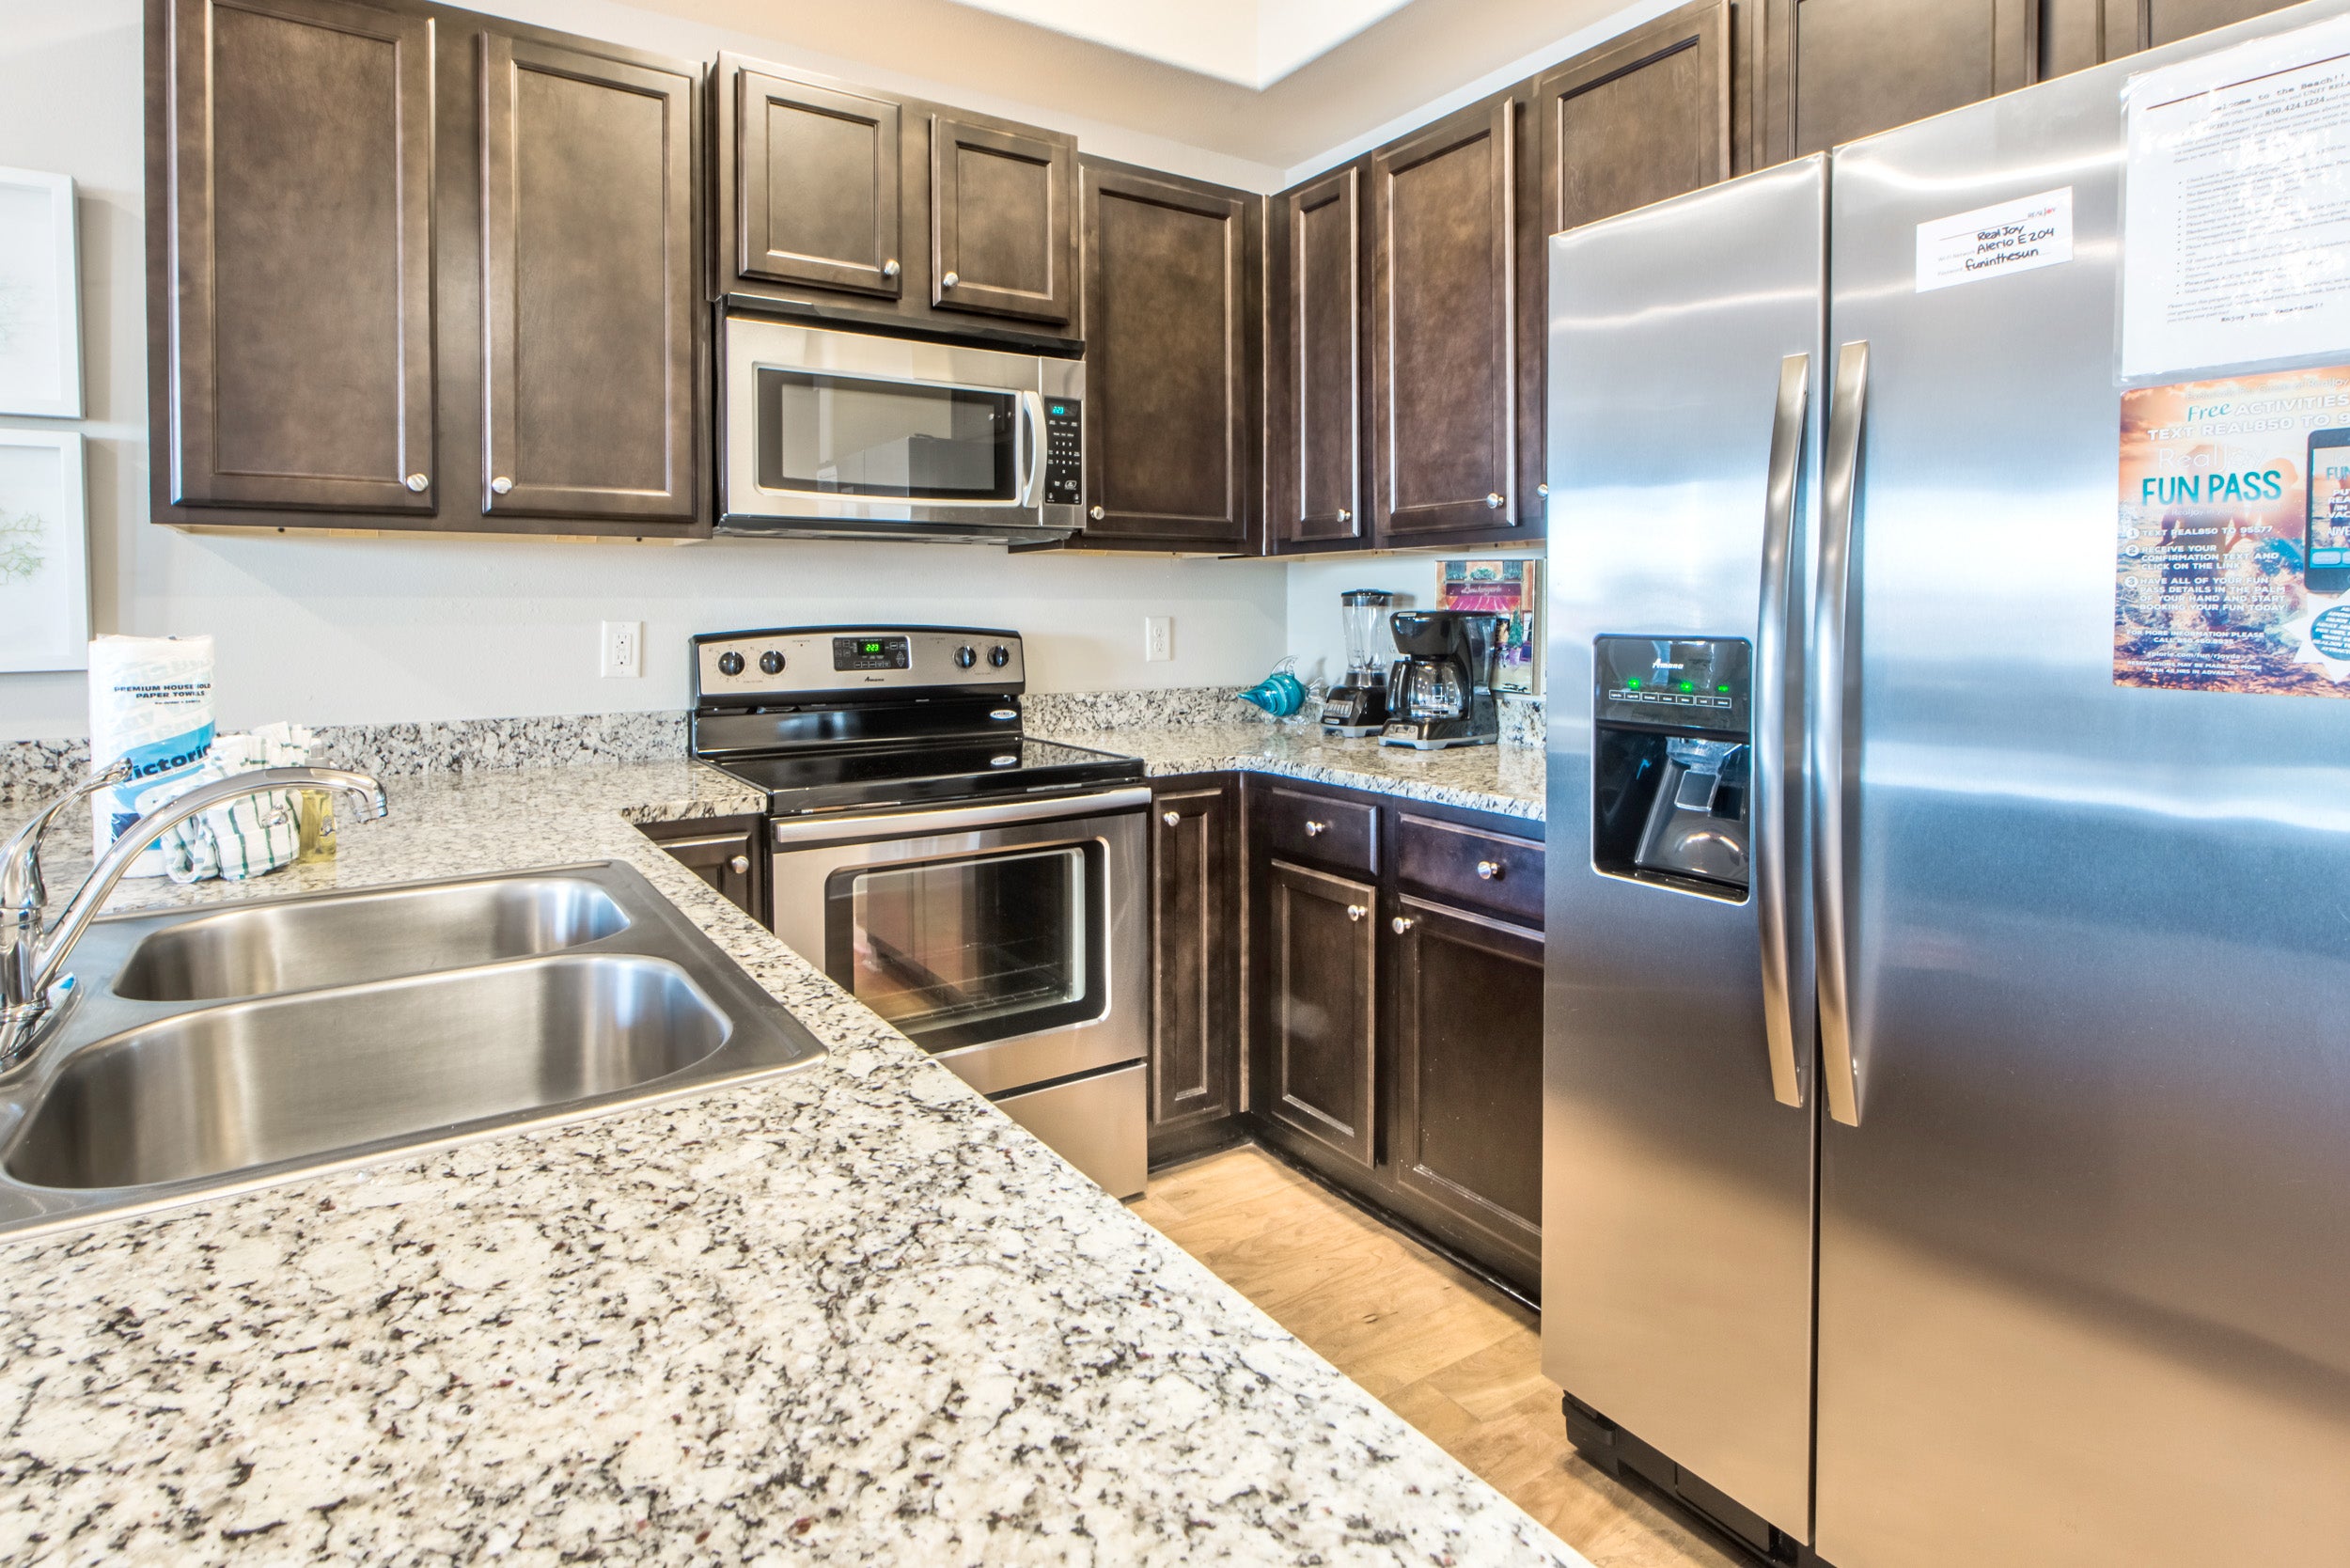 Stainless appliances in gorgeous updated kitchen